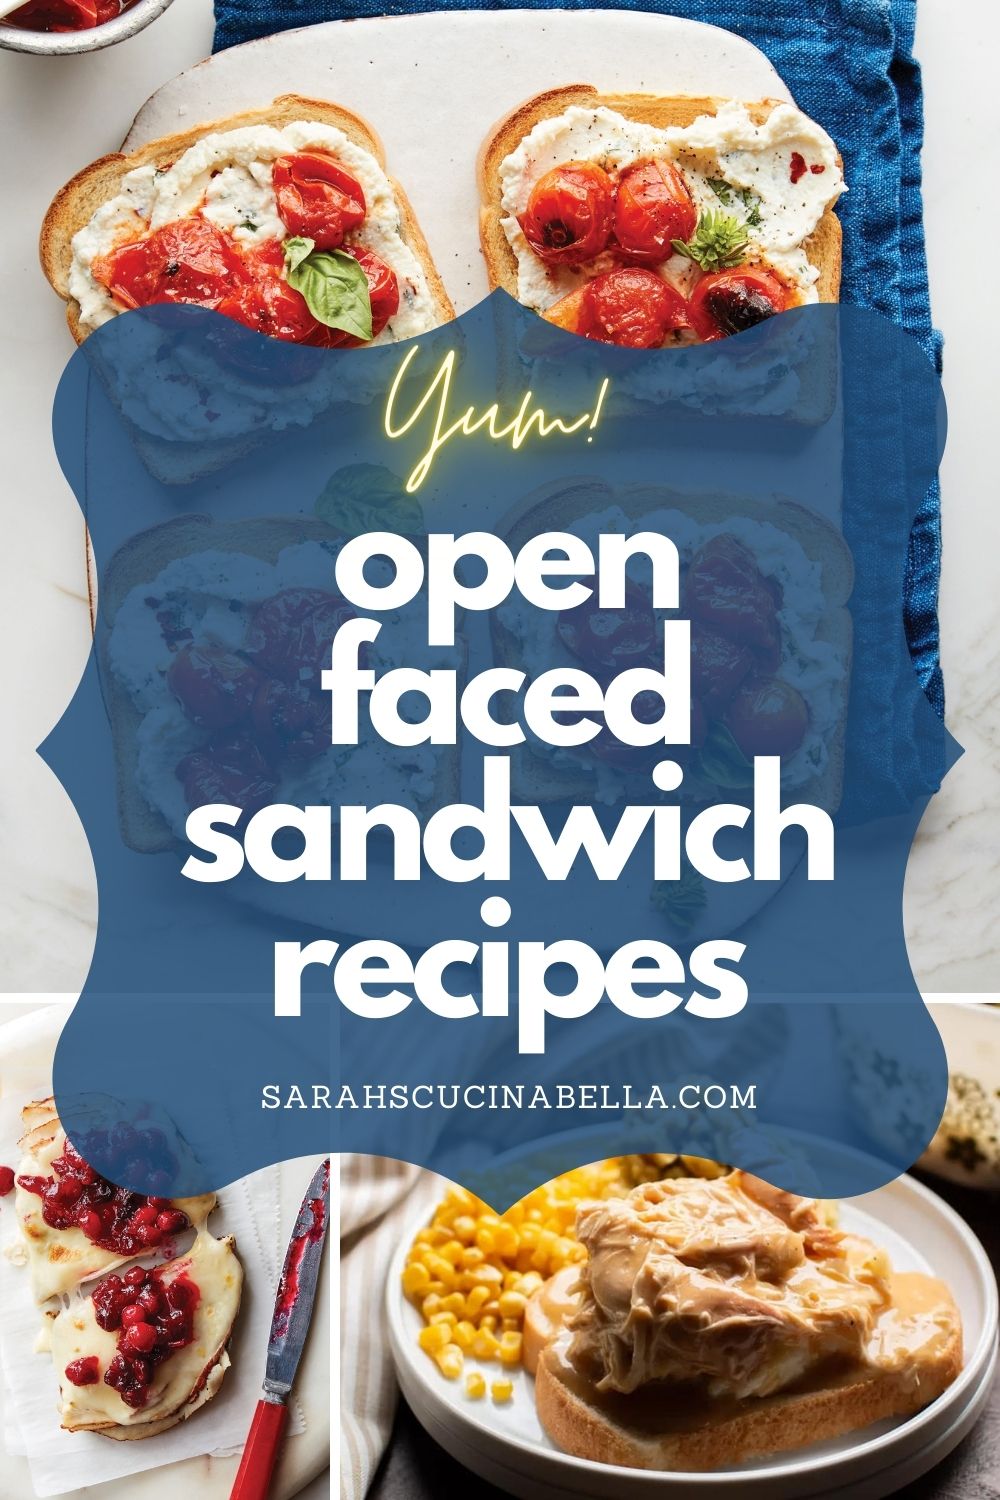 This image combines three pictures of open faced sandwiches with a blue box superimposed on them. In the box are the words "Yum! Open faced sandwich recipes" and "sarahscucinabella.com."